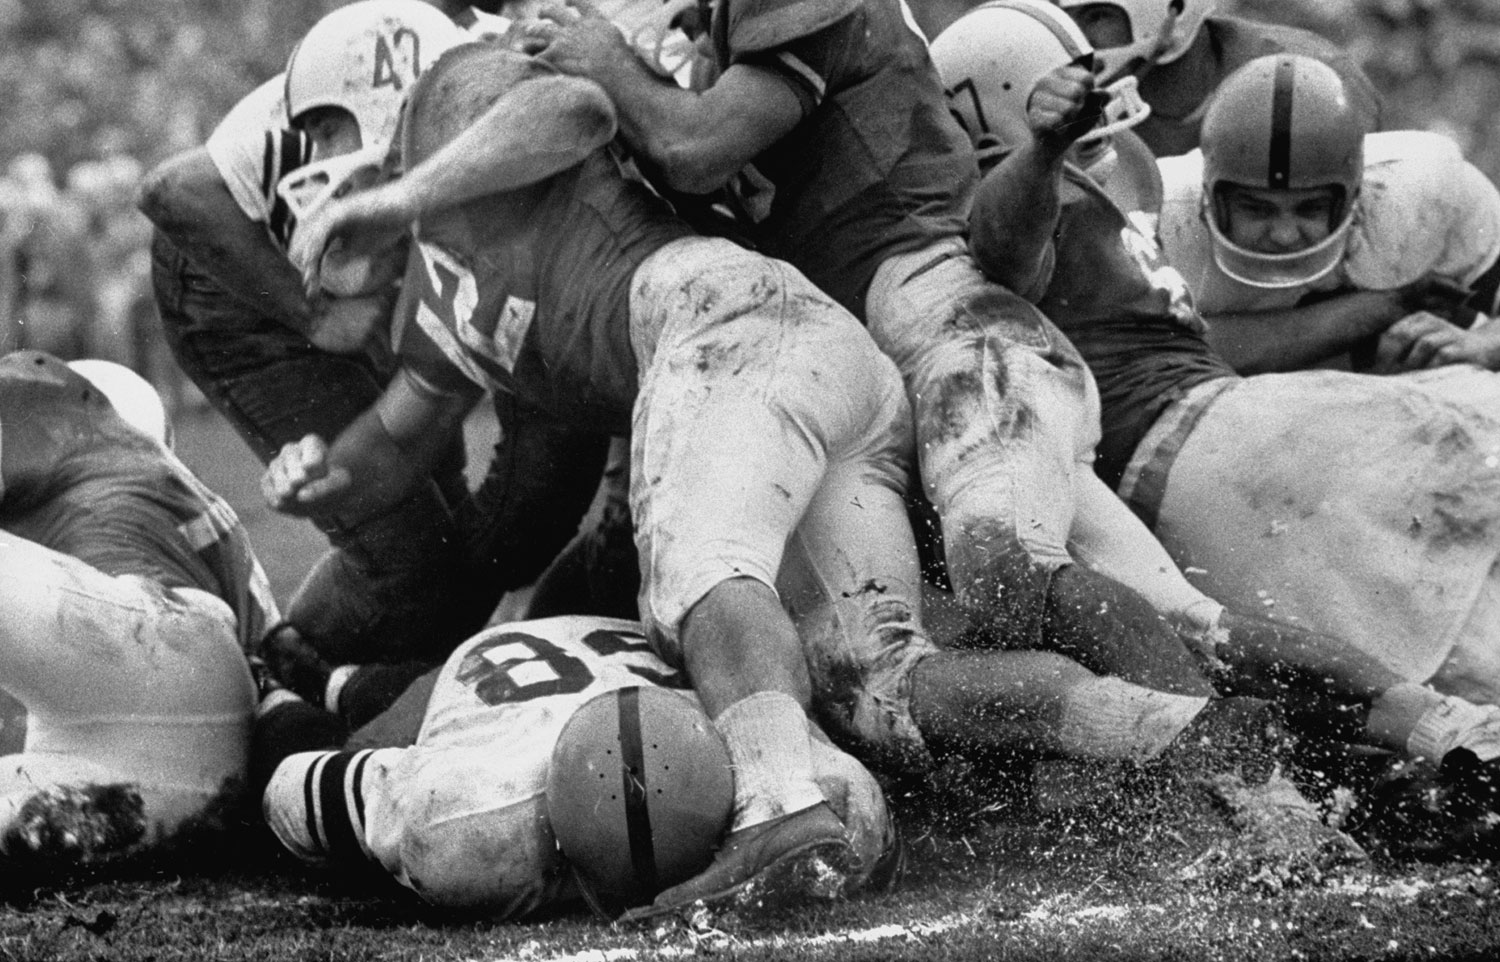 Syracuse vs. Texas, 1960 Cotton Bowl. Syracuse beat Texas 23-14 behind a great performance by Ernie Davis -- the first African American to win the Heisman.